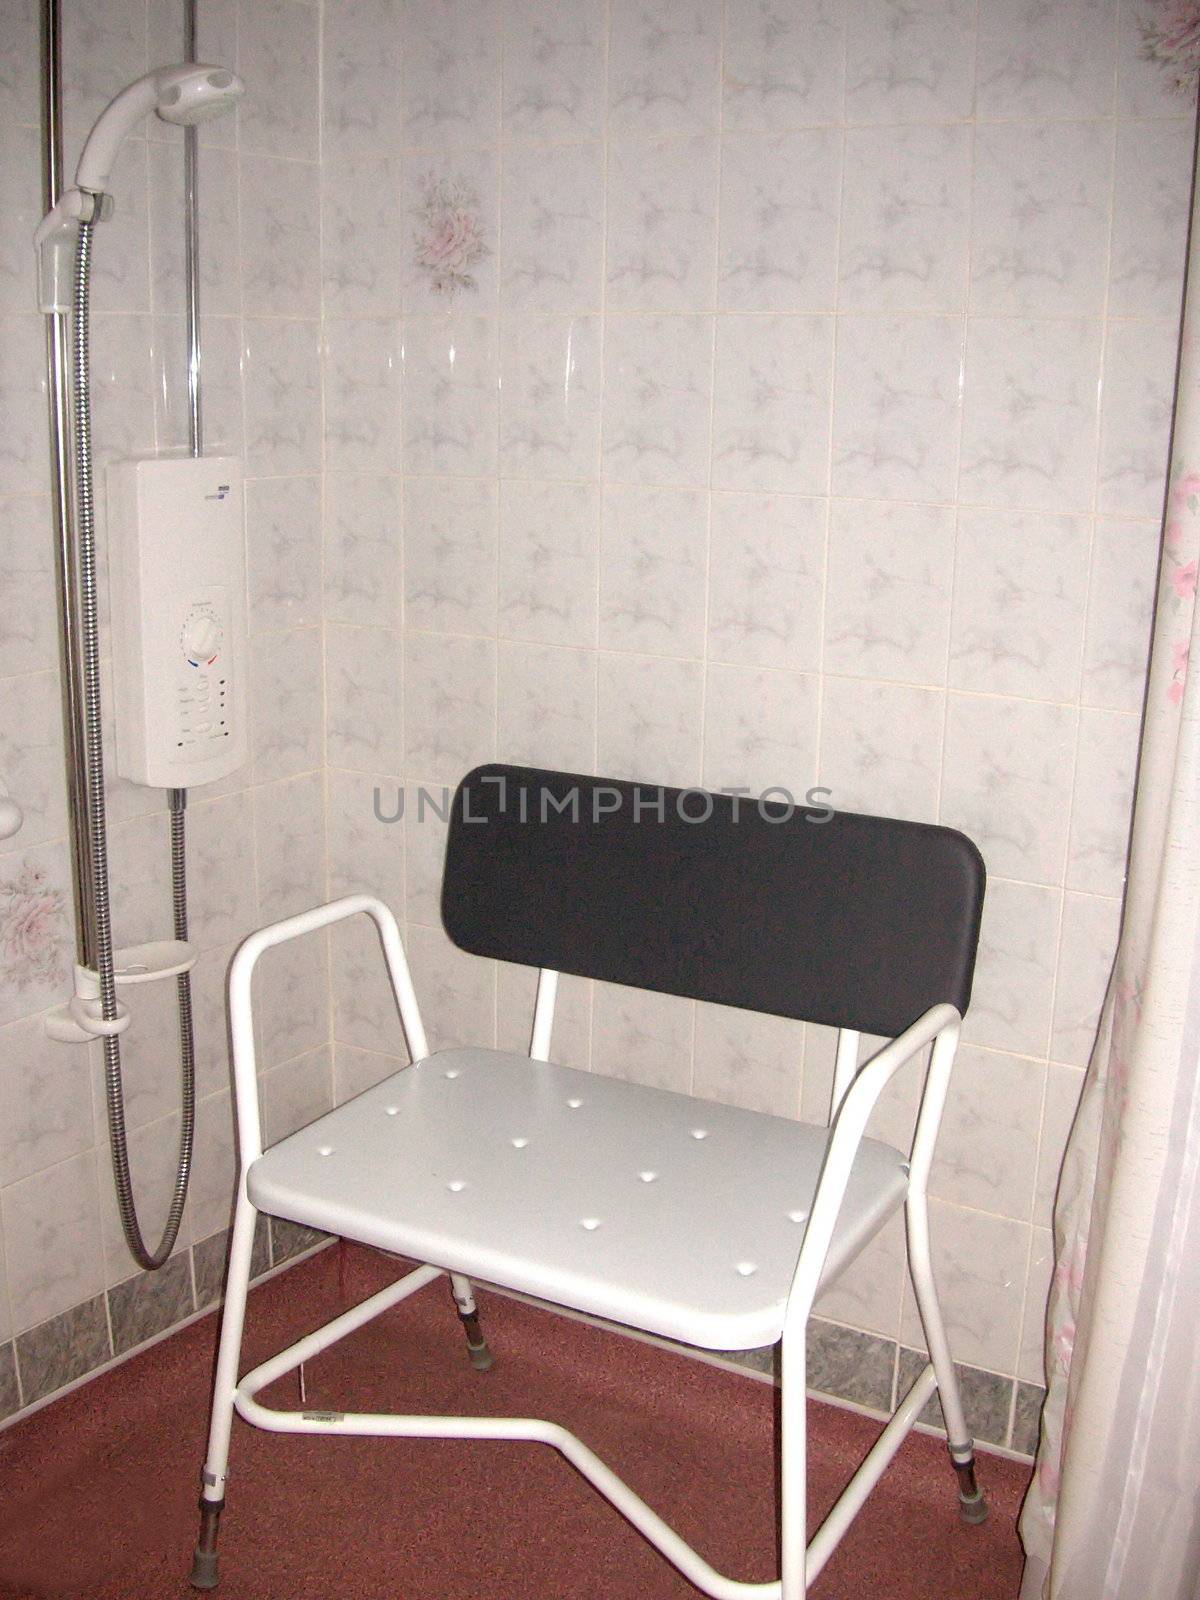 disabled persons shower-chair in the shower area